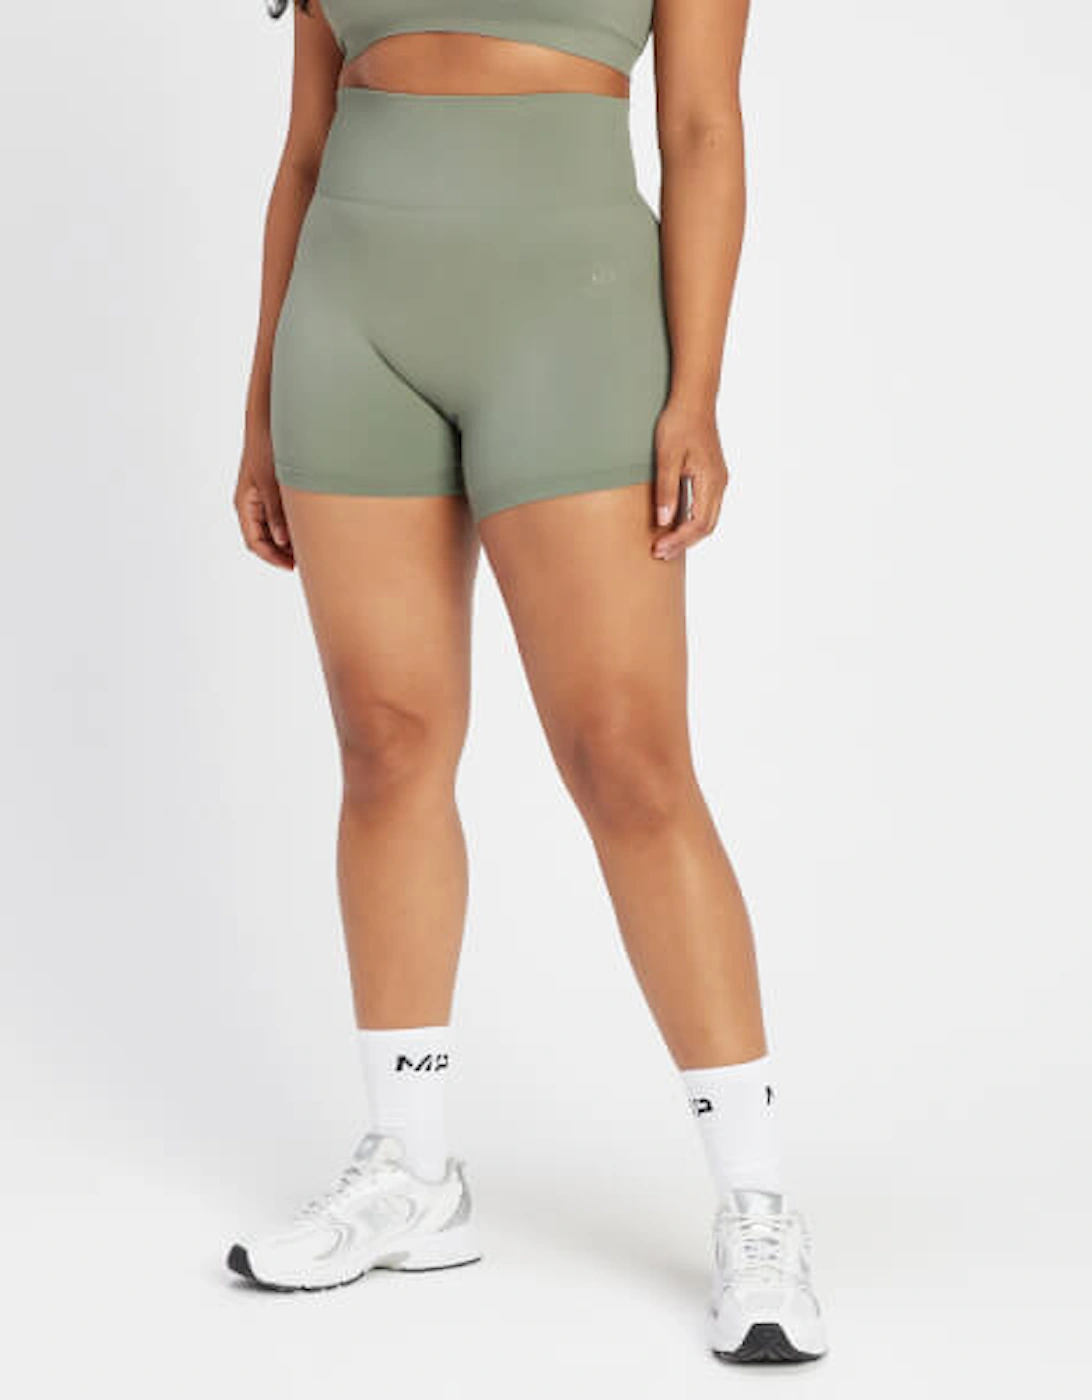 Women's Rest Day Seamless Booty Short - Taupe Green